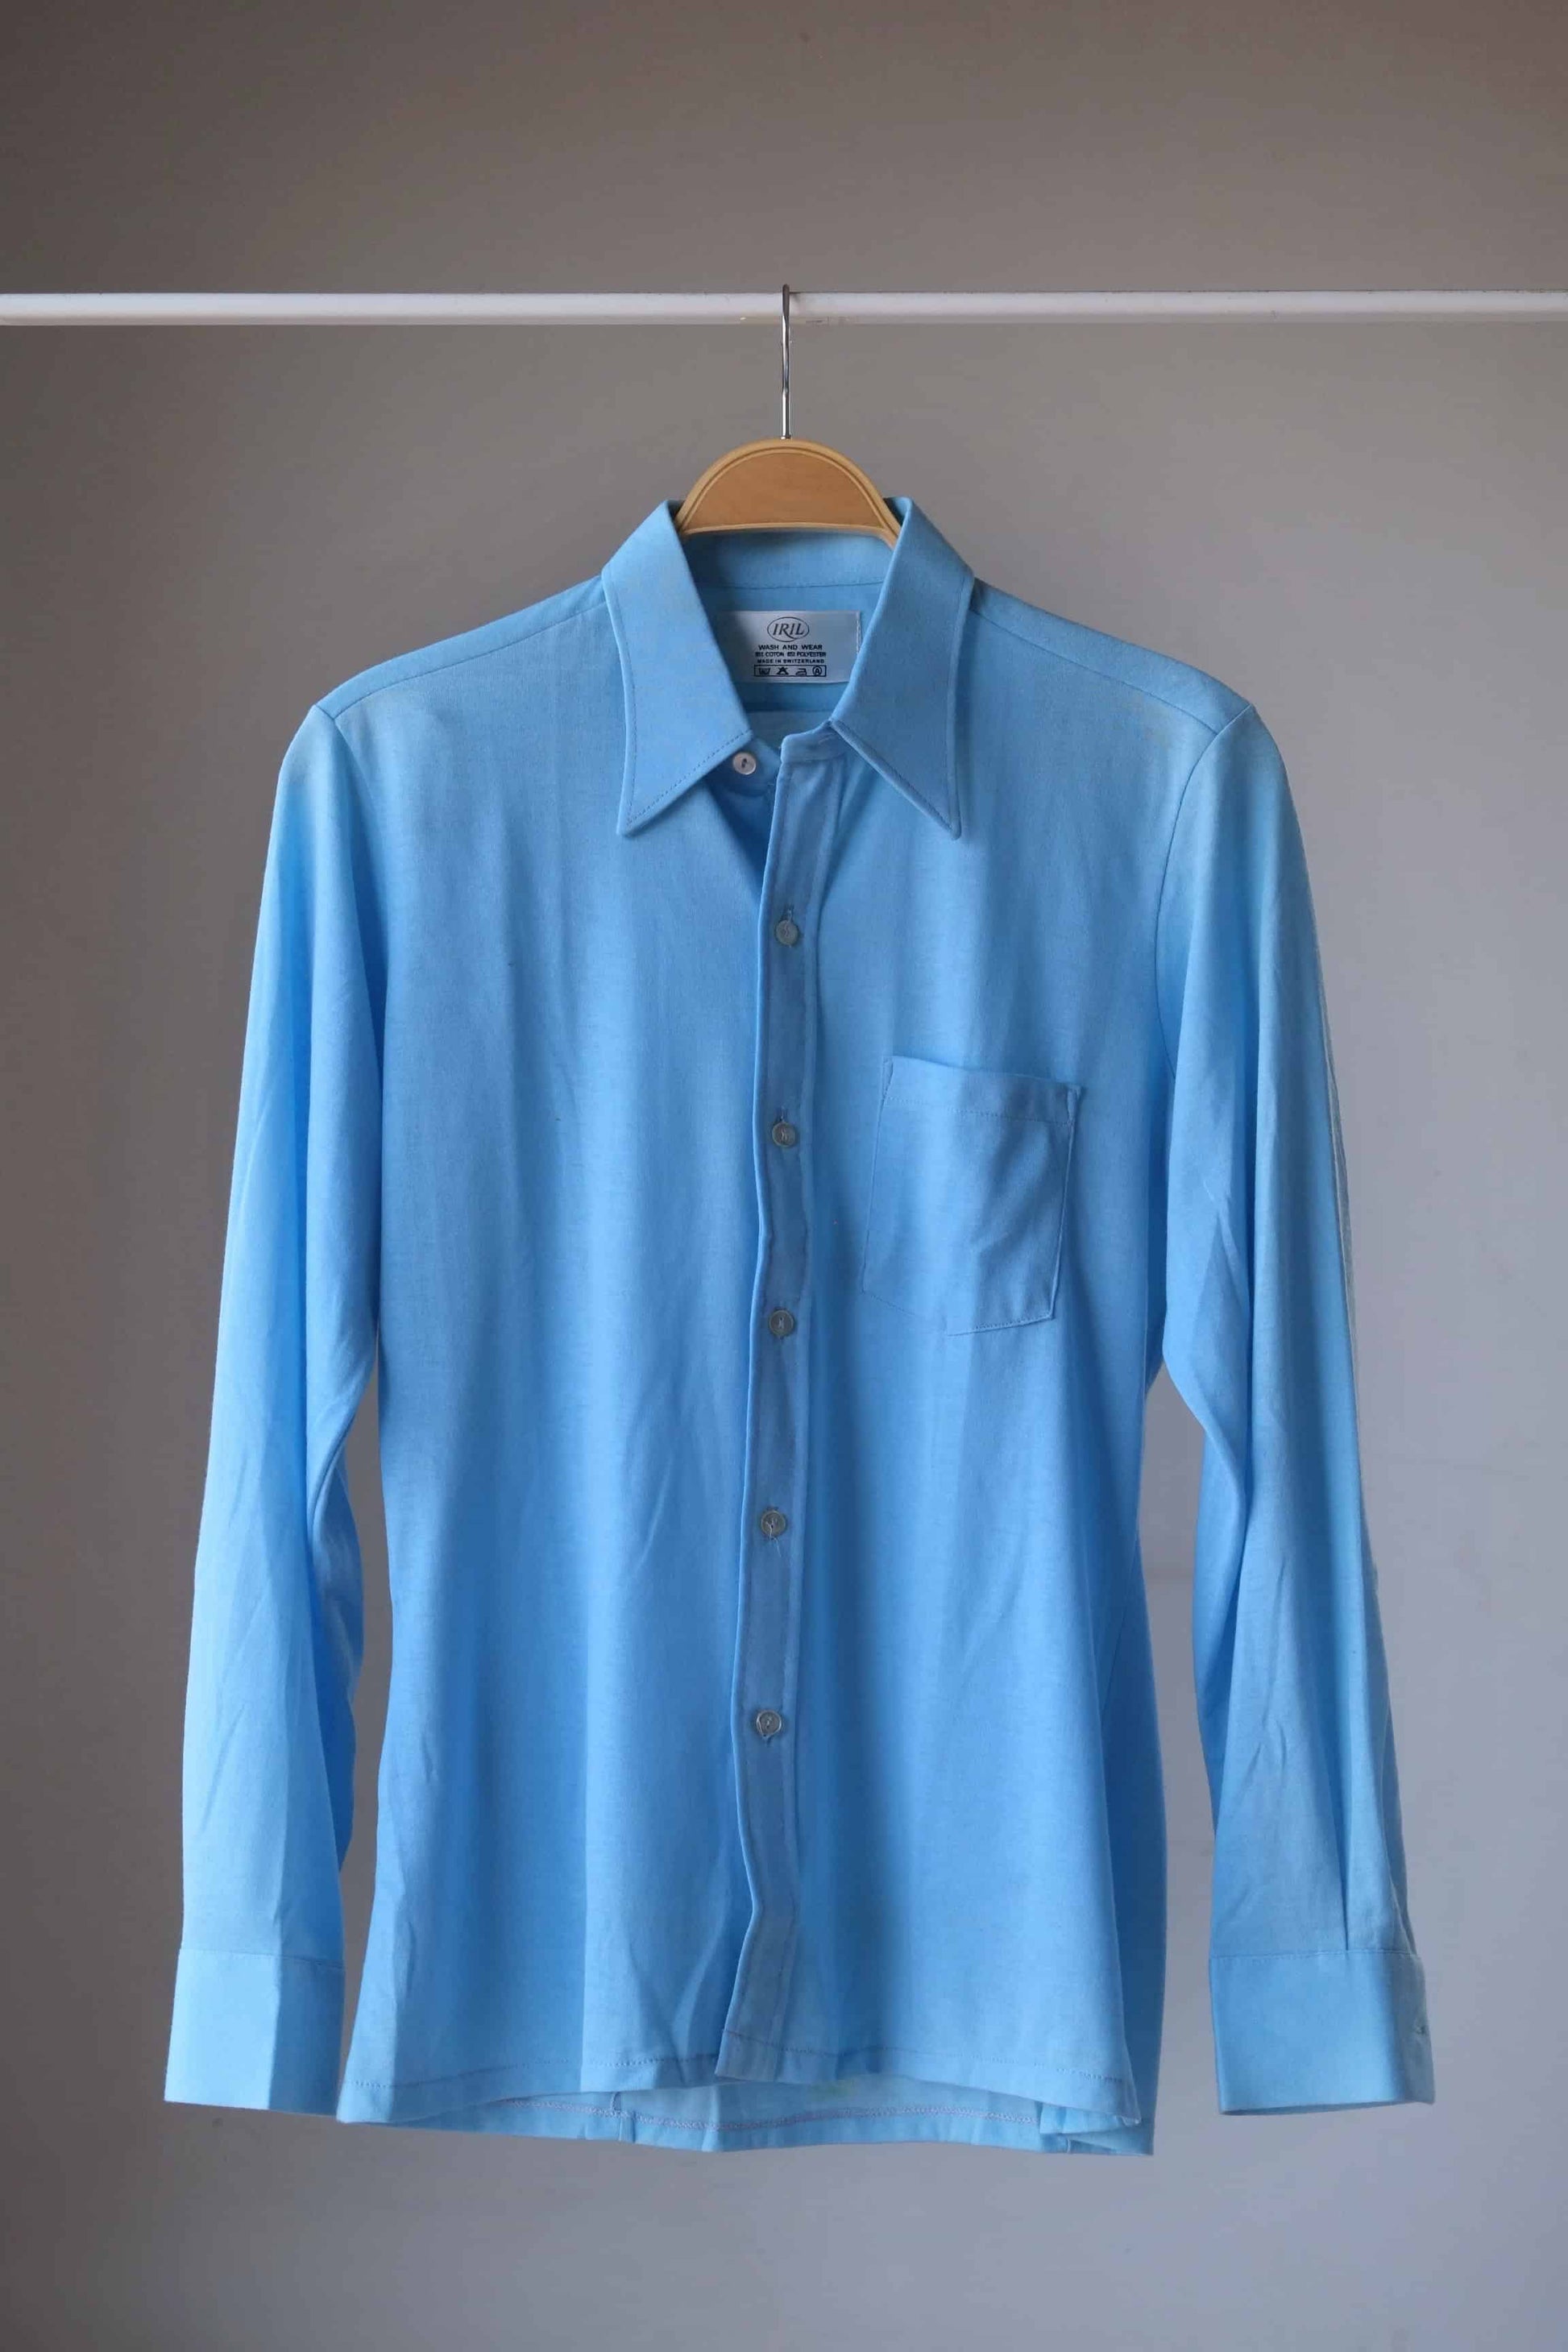 Vintage 70s pointy collar shirt blue